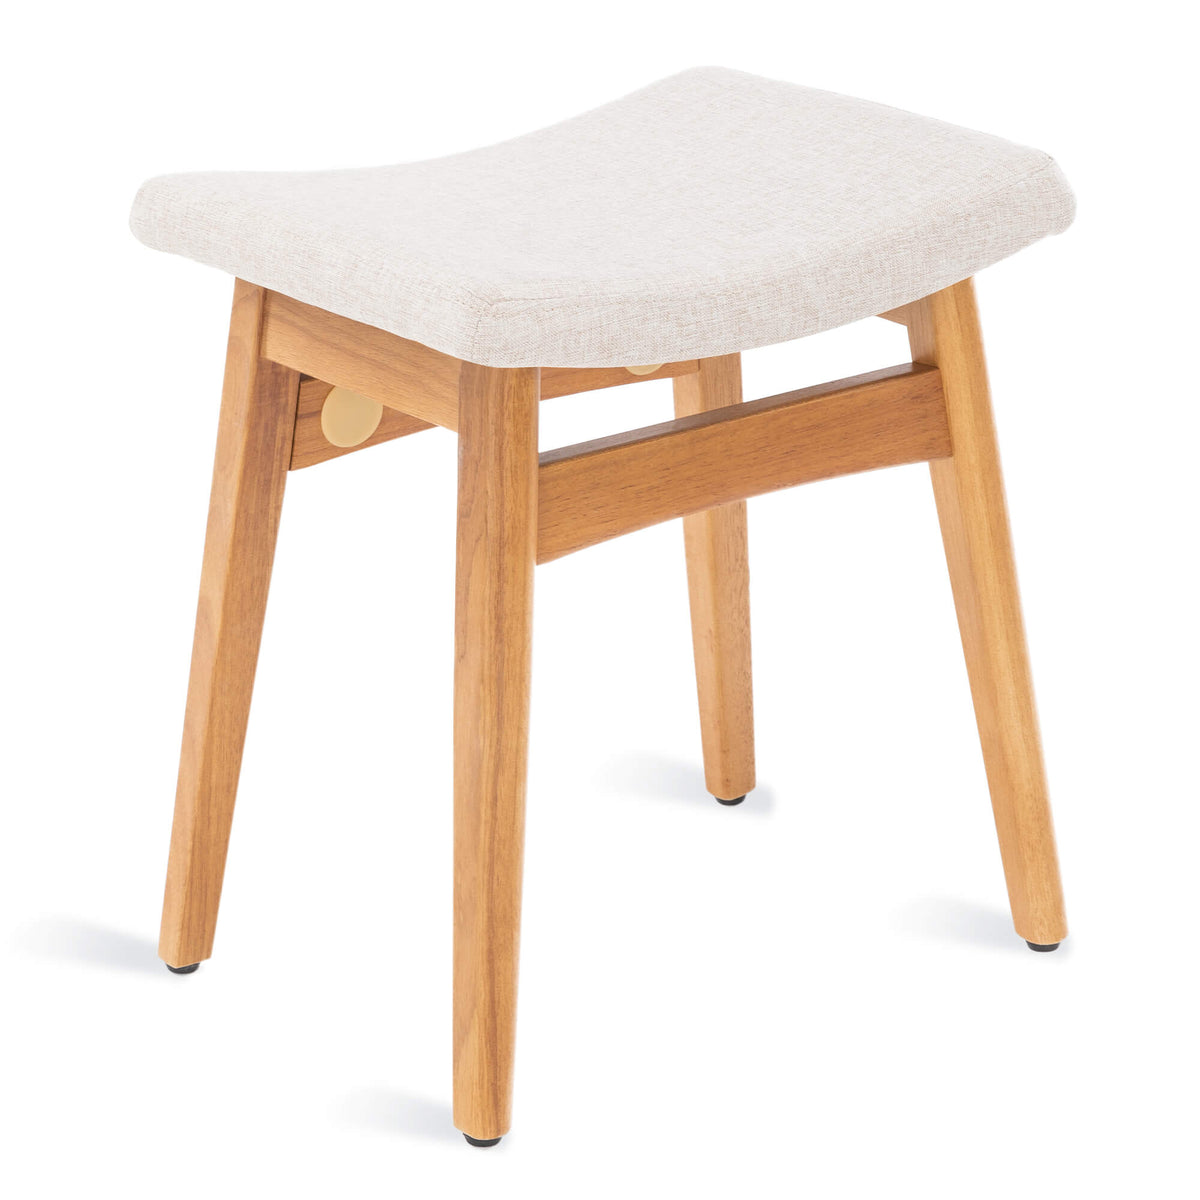 LUE BONA Foot Stool, Saddle Cushion Vanity Stool, Modern Concave Ottoman  with Solid Wood Legs and Upholstered Seat for Entryway, Bedroom, Patio,  Living Room, 17, Wood Color Leg Beige Fabric - Yahoo